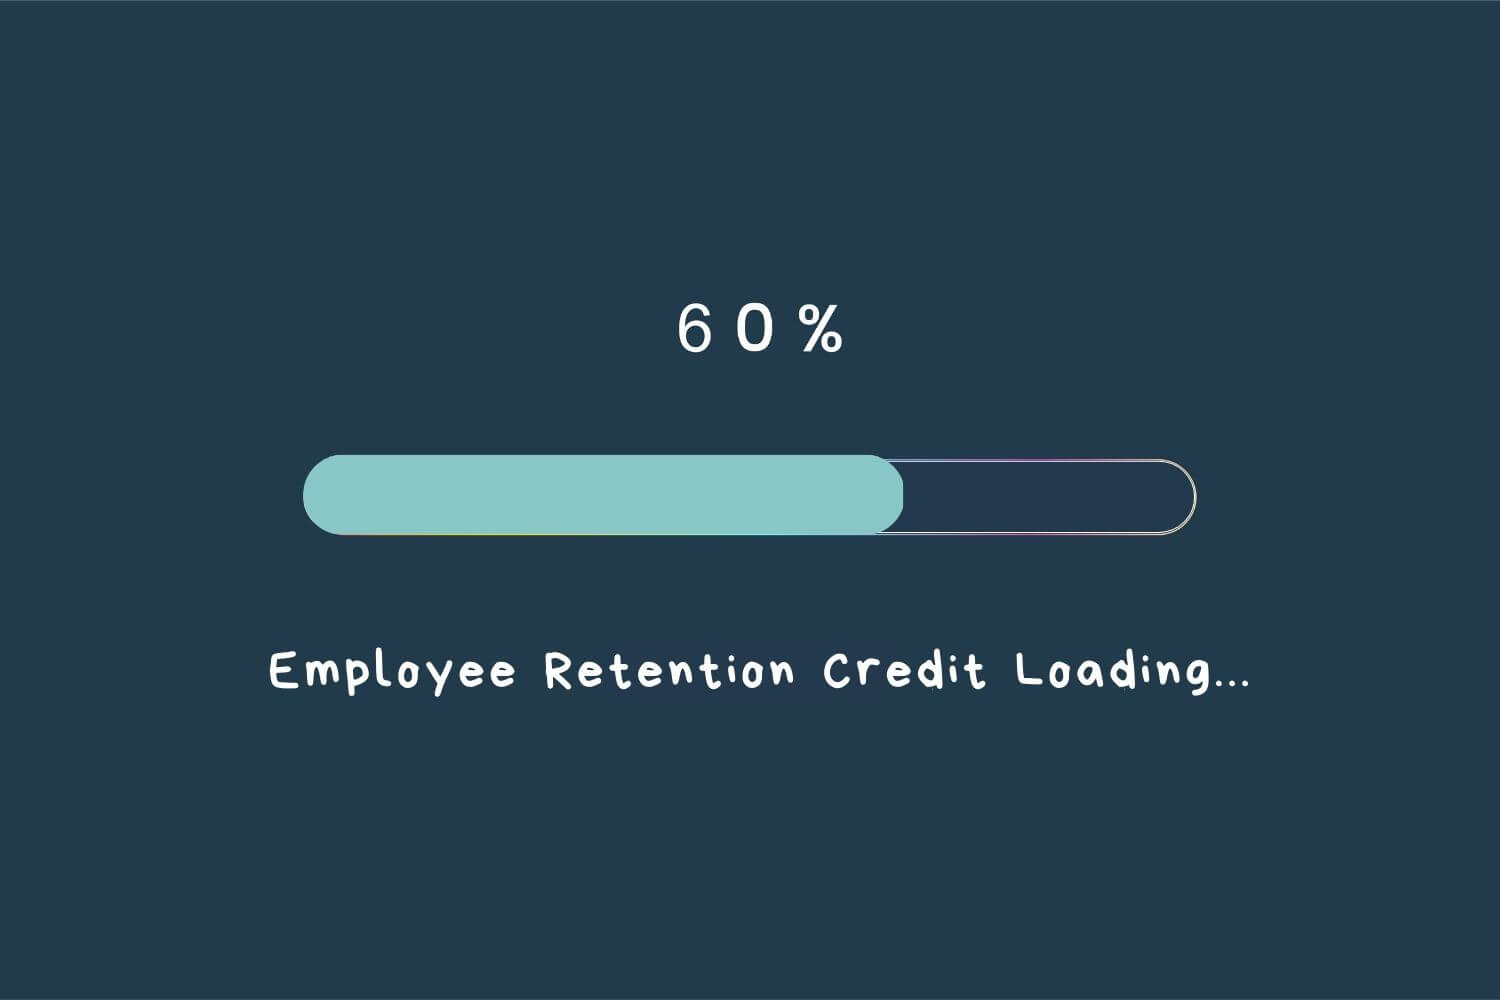 How To Check the Status of Your Employee Retention Credit